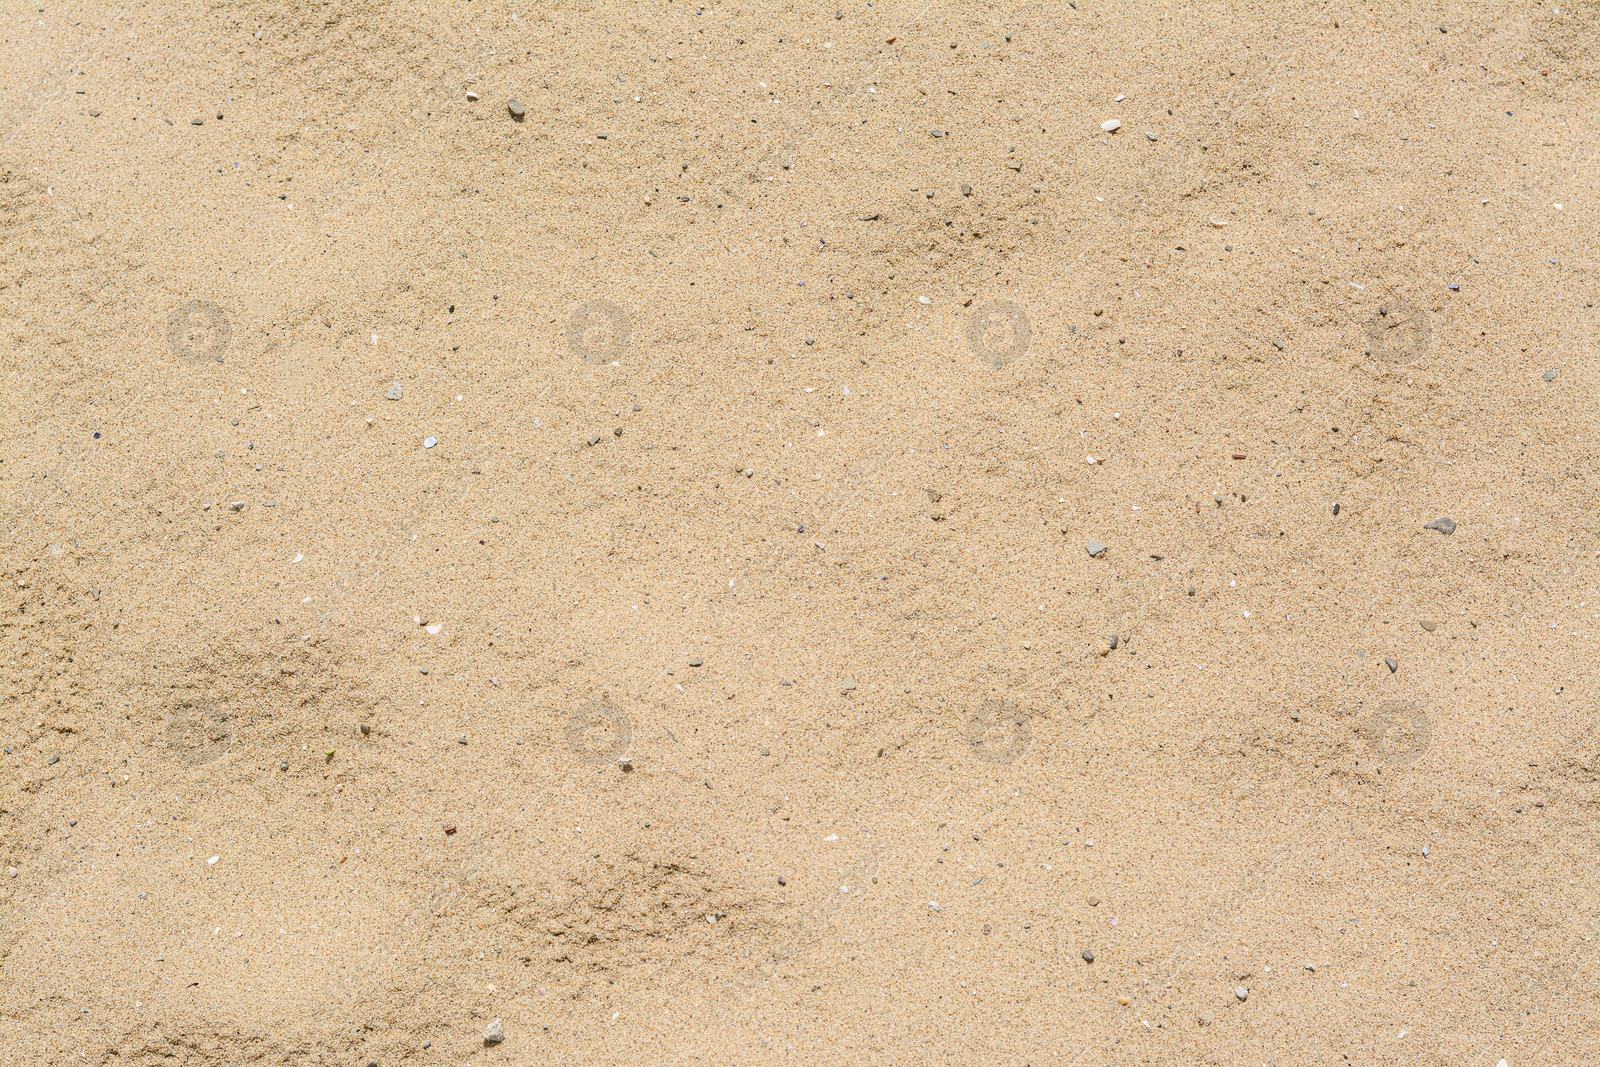 Photo of Texture of sandy beach as background, above view